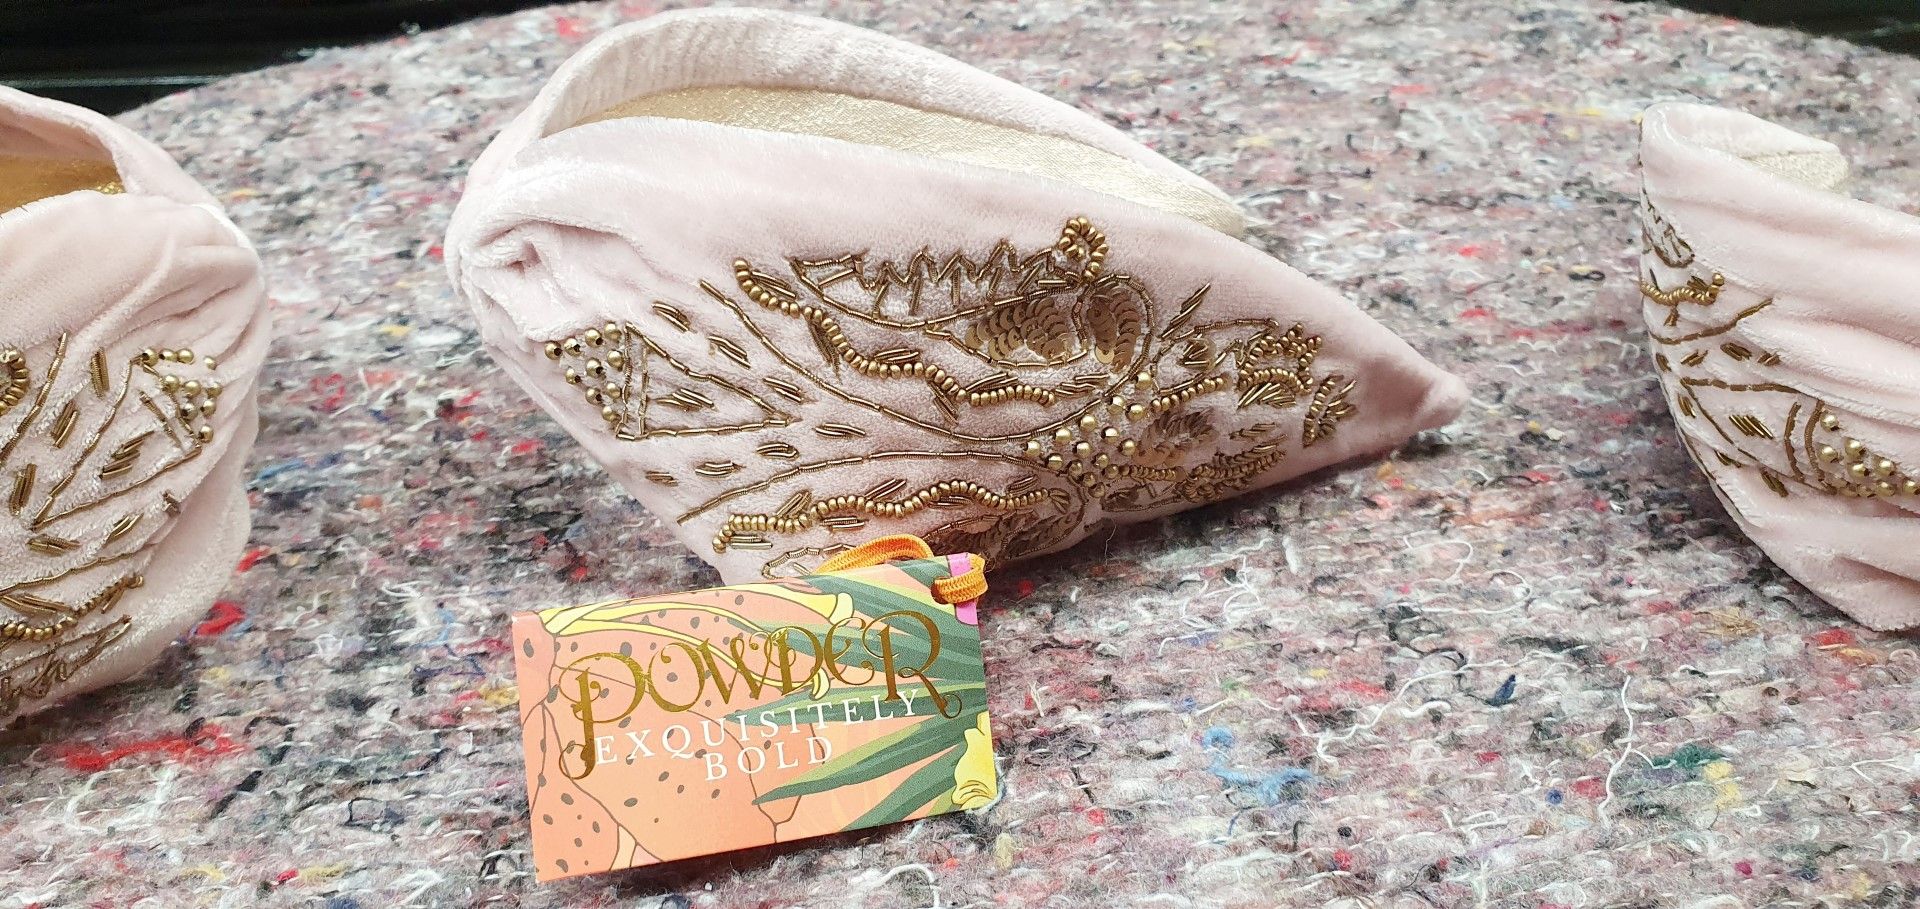 5 x Toiletries Bags By Powder and 3 x Velvet Hair Bands By Powder - New Stock - Ref: TCH244 - - Image 8 of 8